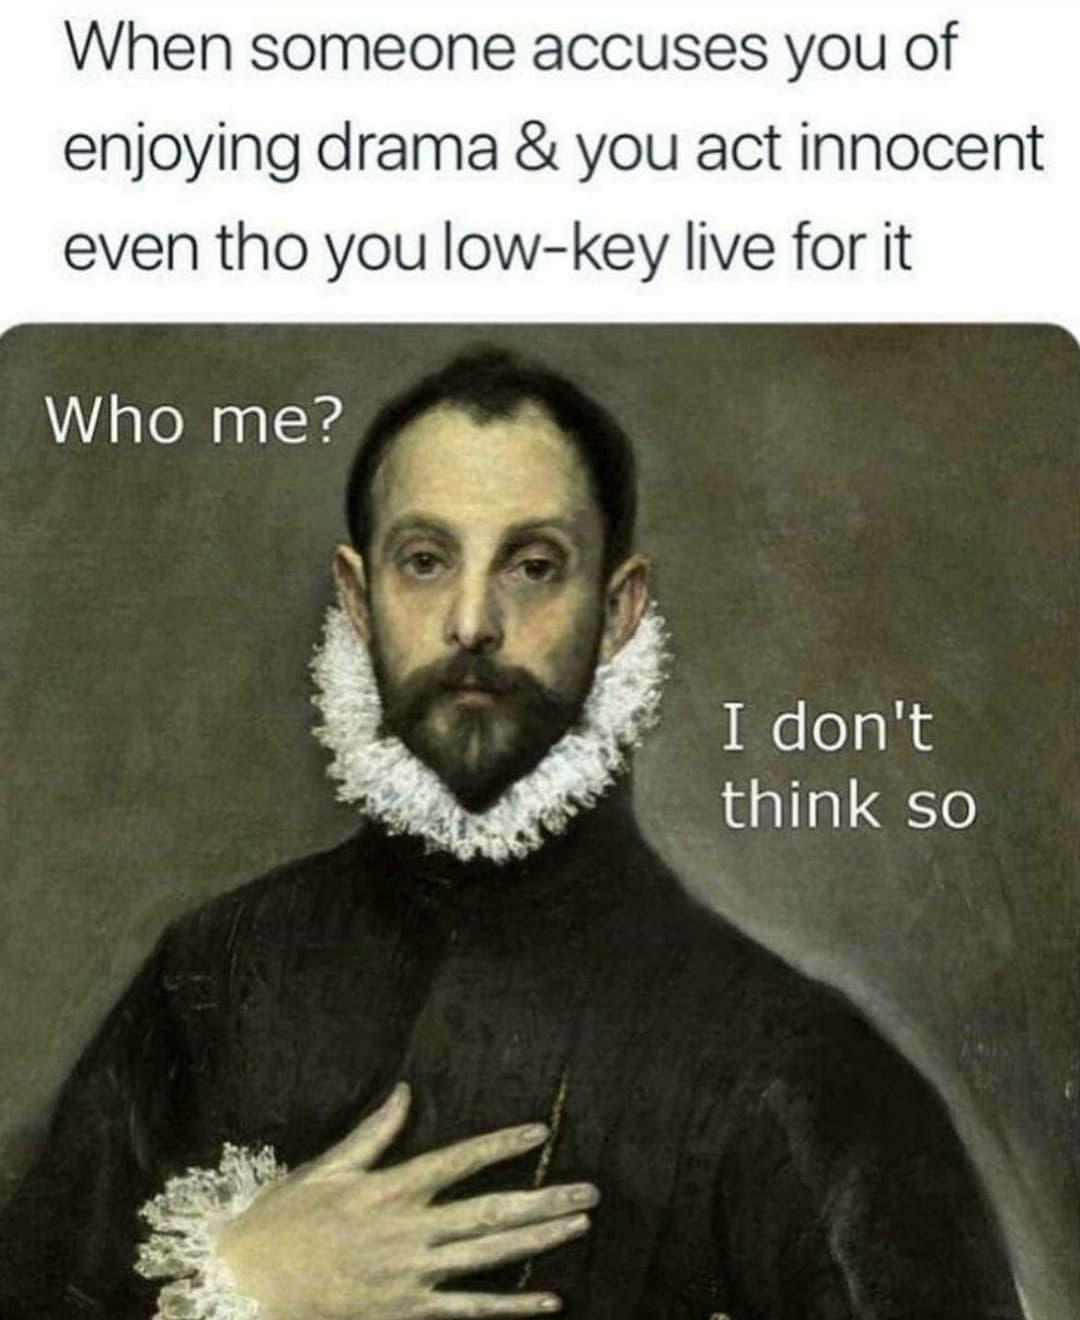 monday morning randomness - nobleman with his hand on his chest - When someone accuses you of enjoying drama & you act innocent even tho you lowkey live for it Who me? I don't think so